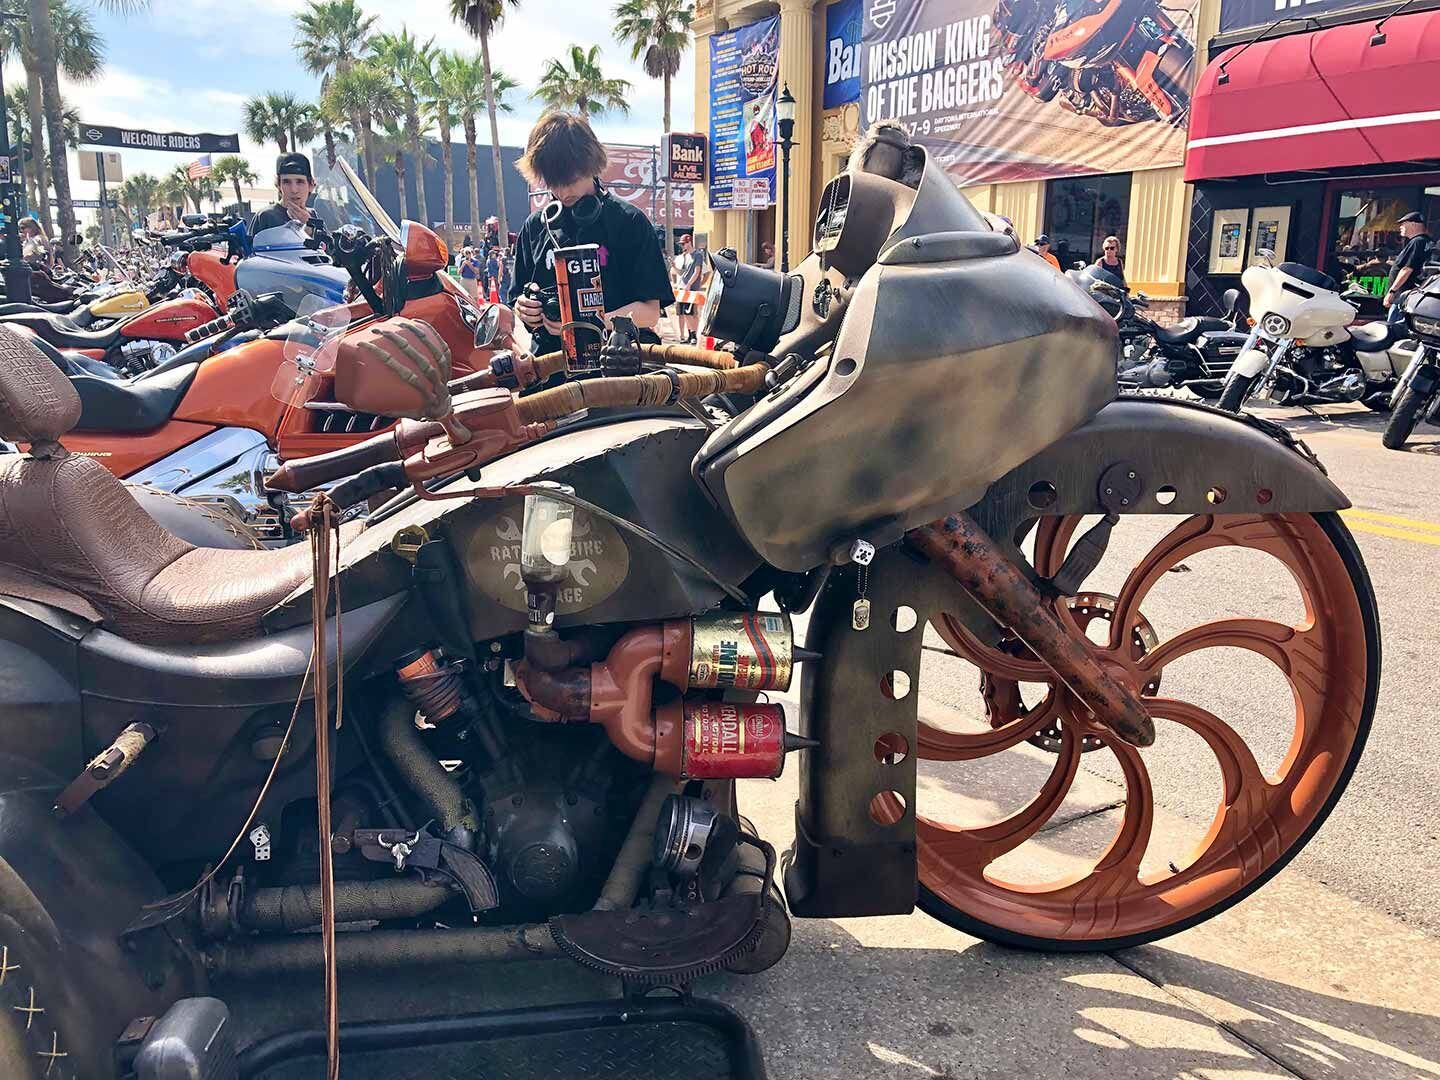 Customs, one-offs, and insane theme bikes were out in force on Main Street. This big-wheel rat bike bagger drew crowds all day long.